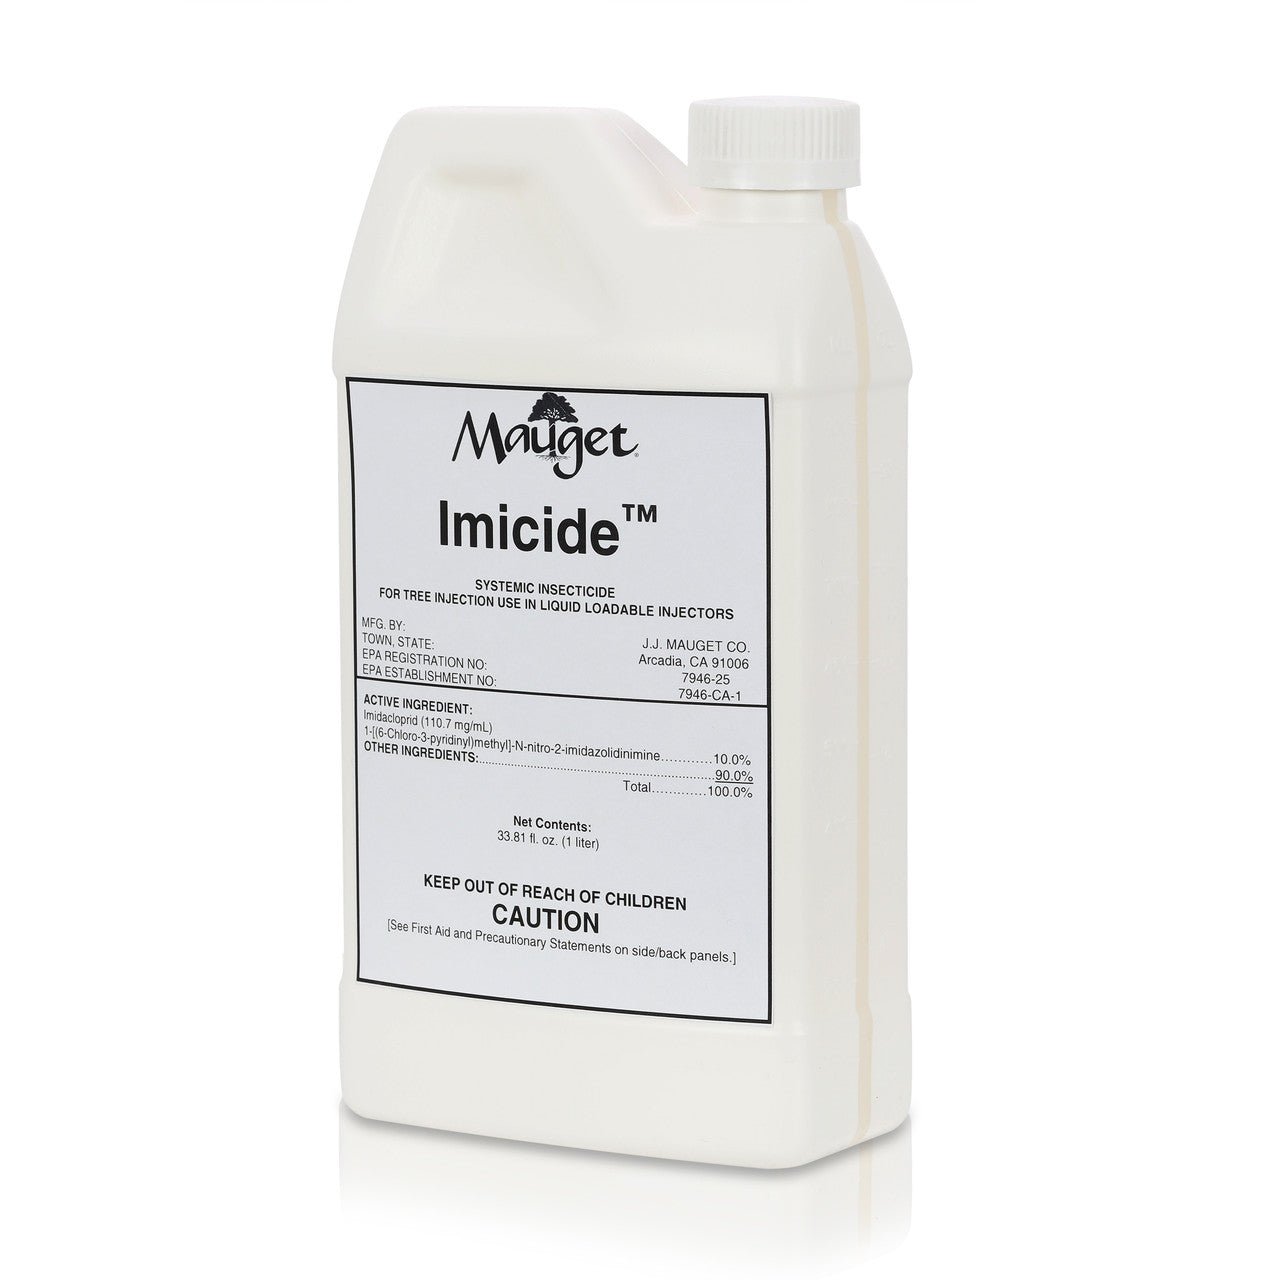 Mauget Imicide Insecticide - Tree Injection Products Co.